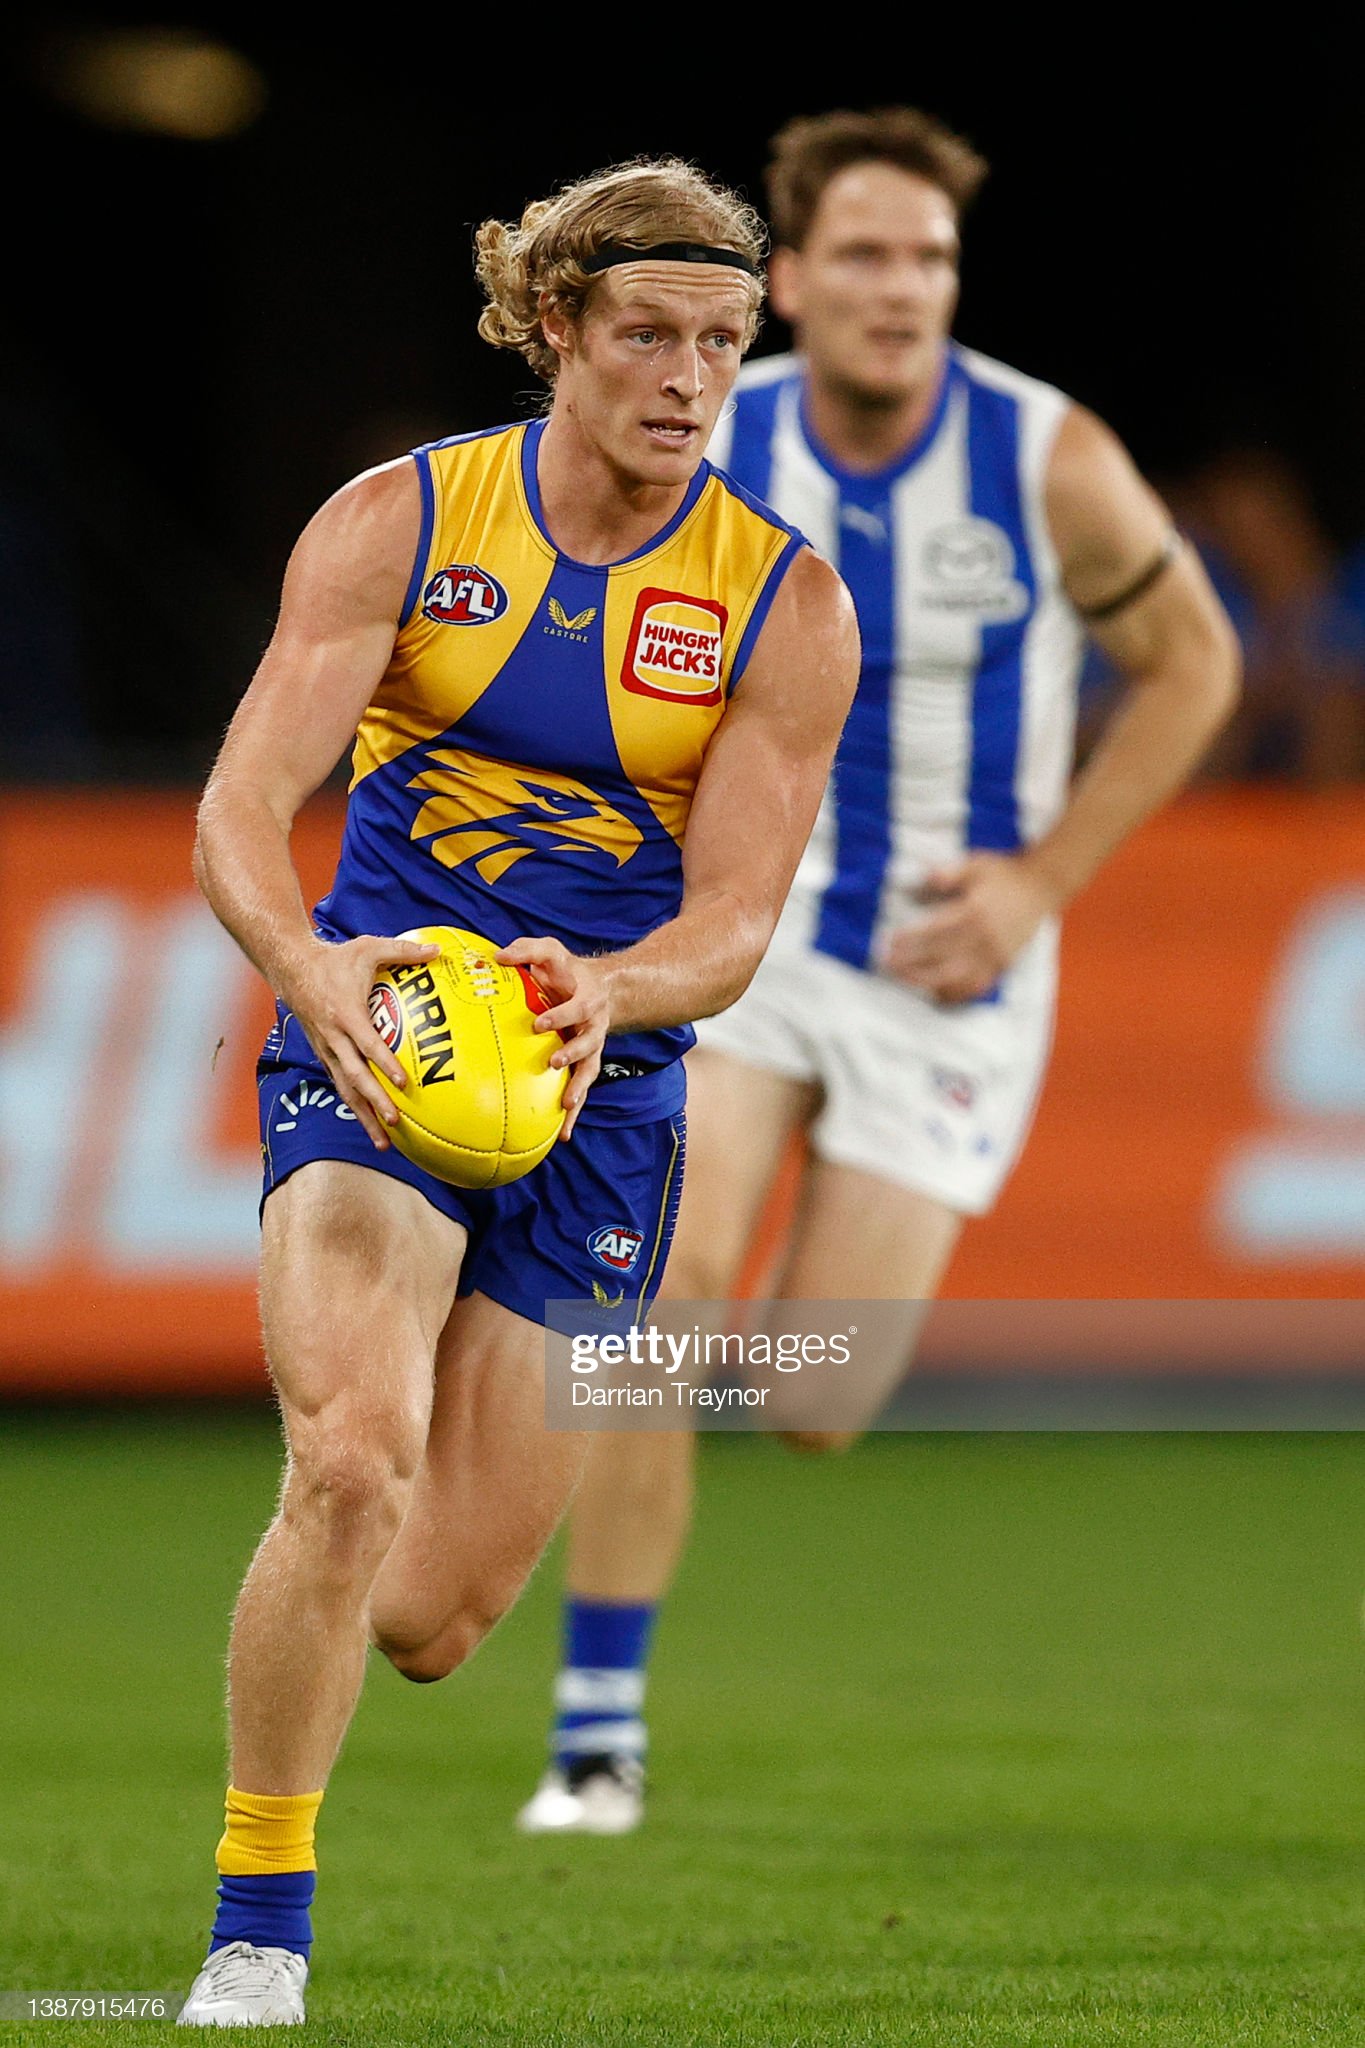 stefan-giro-of-the-eagles-runs-with-the-ball-during-the-round-two-afl-picture-id1387915476